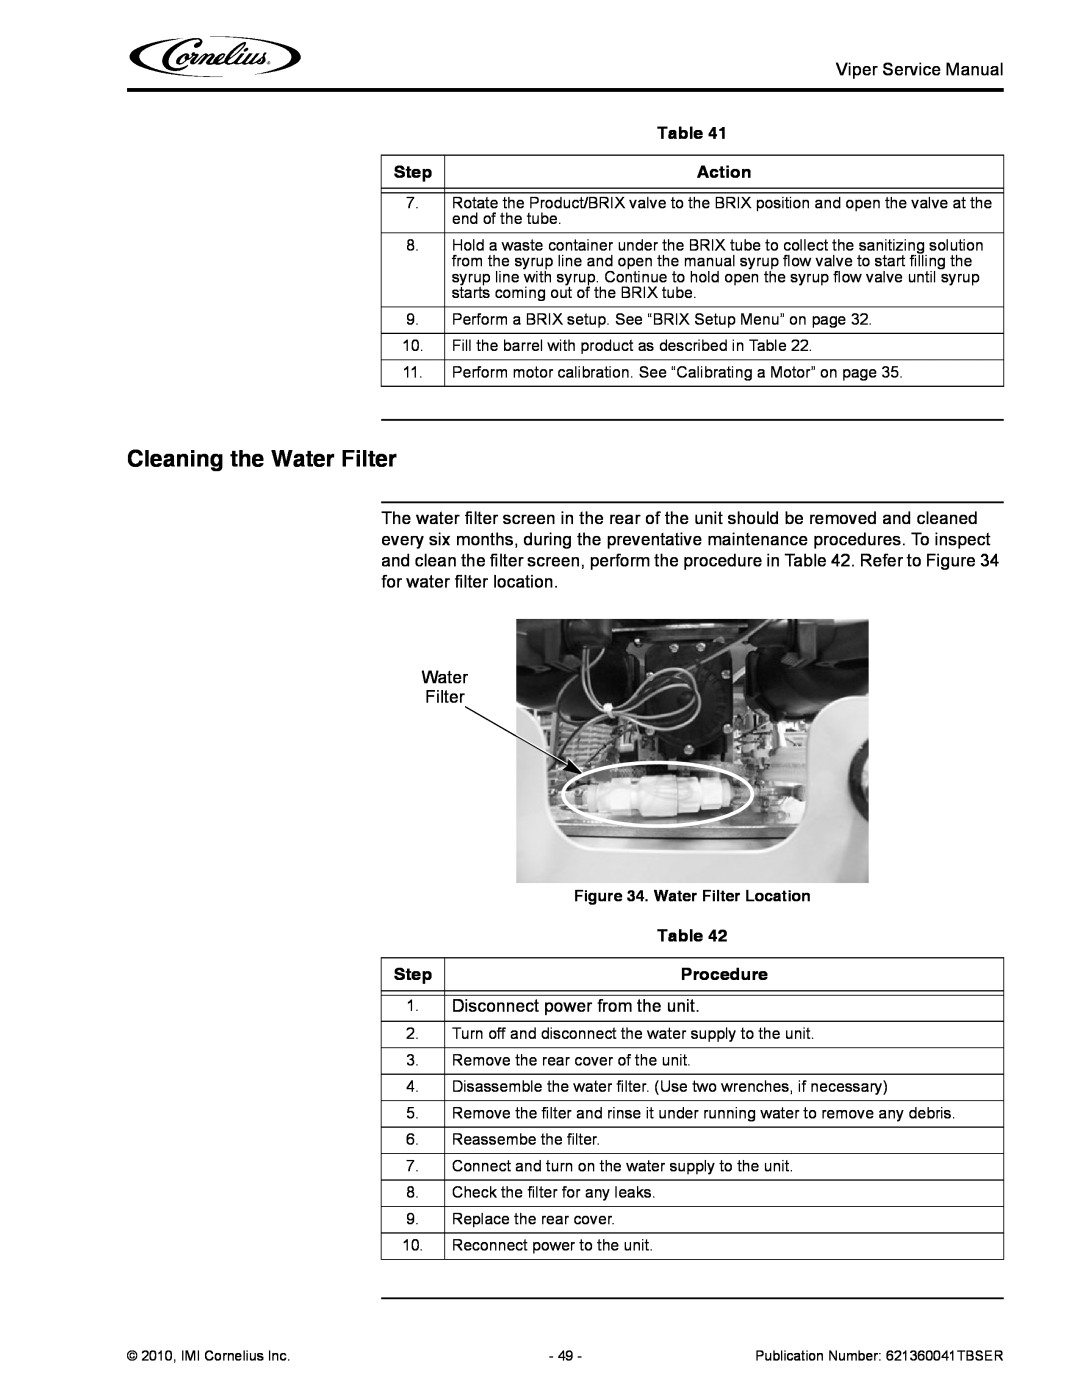 Cornelius 3 service manual Cleaning the Water Filter, Step, Action, Procedure, Water Filter Location 